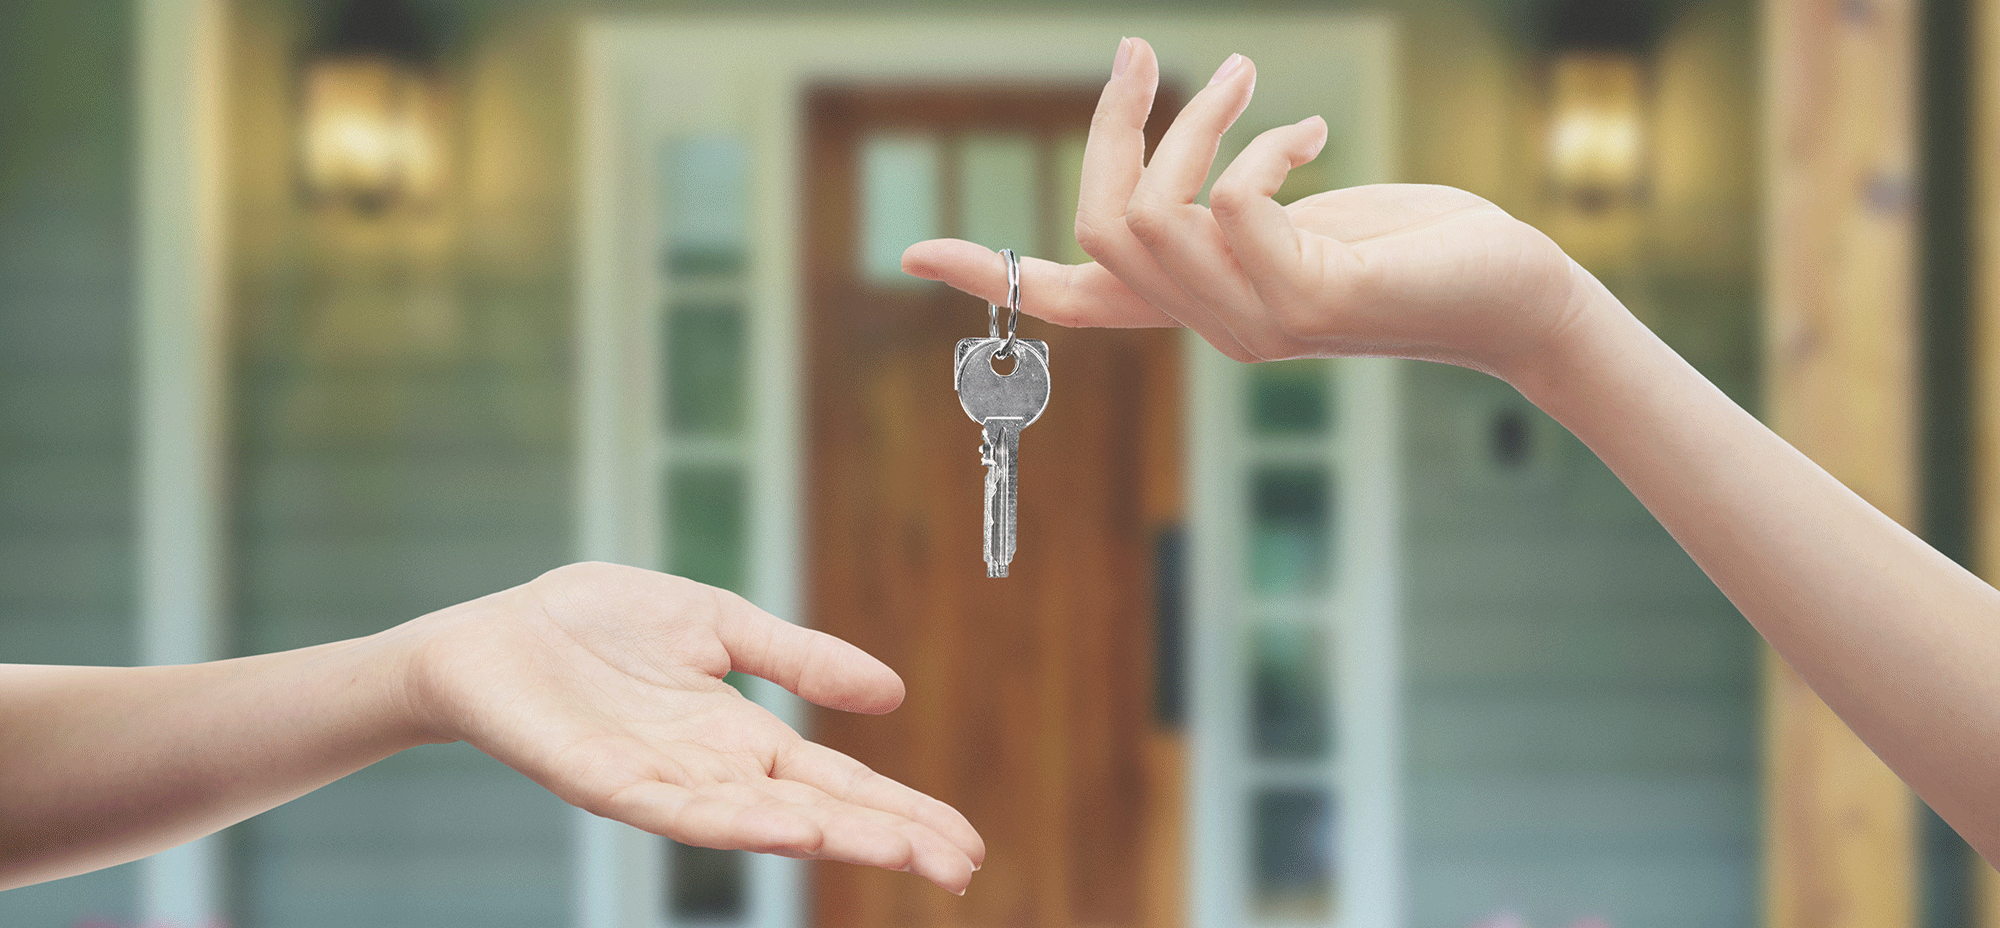 Two hands exchanging keys to a new home.